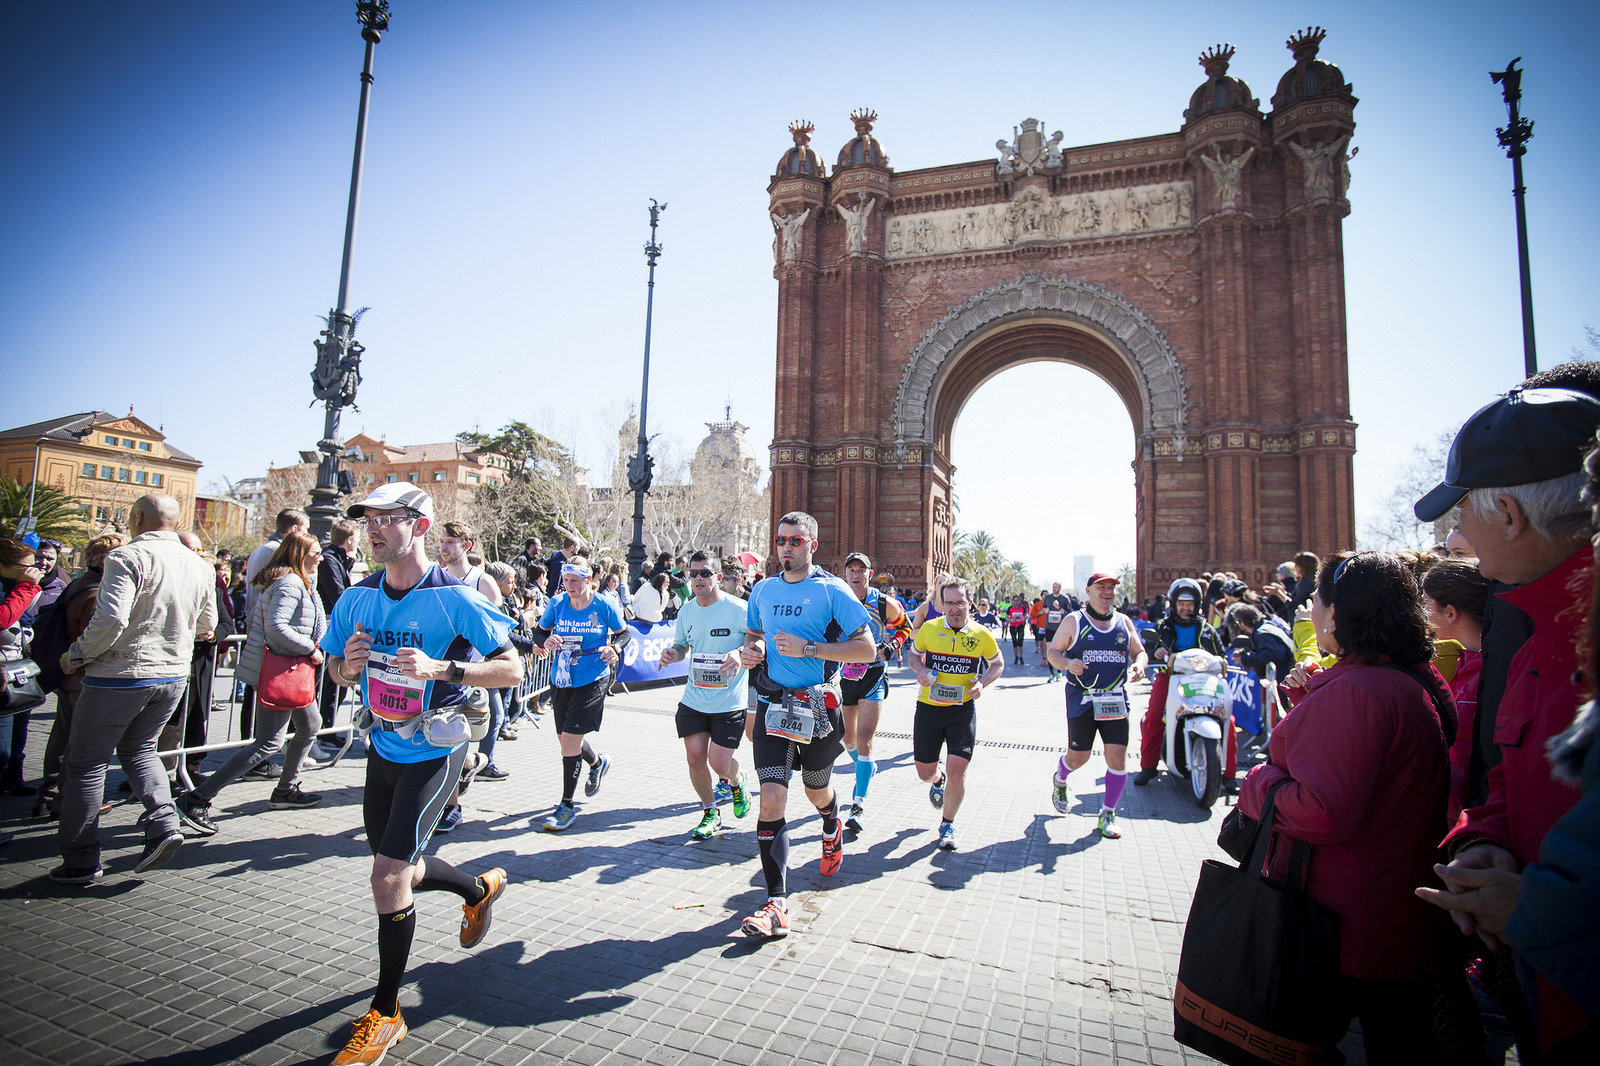 Runners in the Barcelona half marathon - there is a large arch in the background